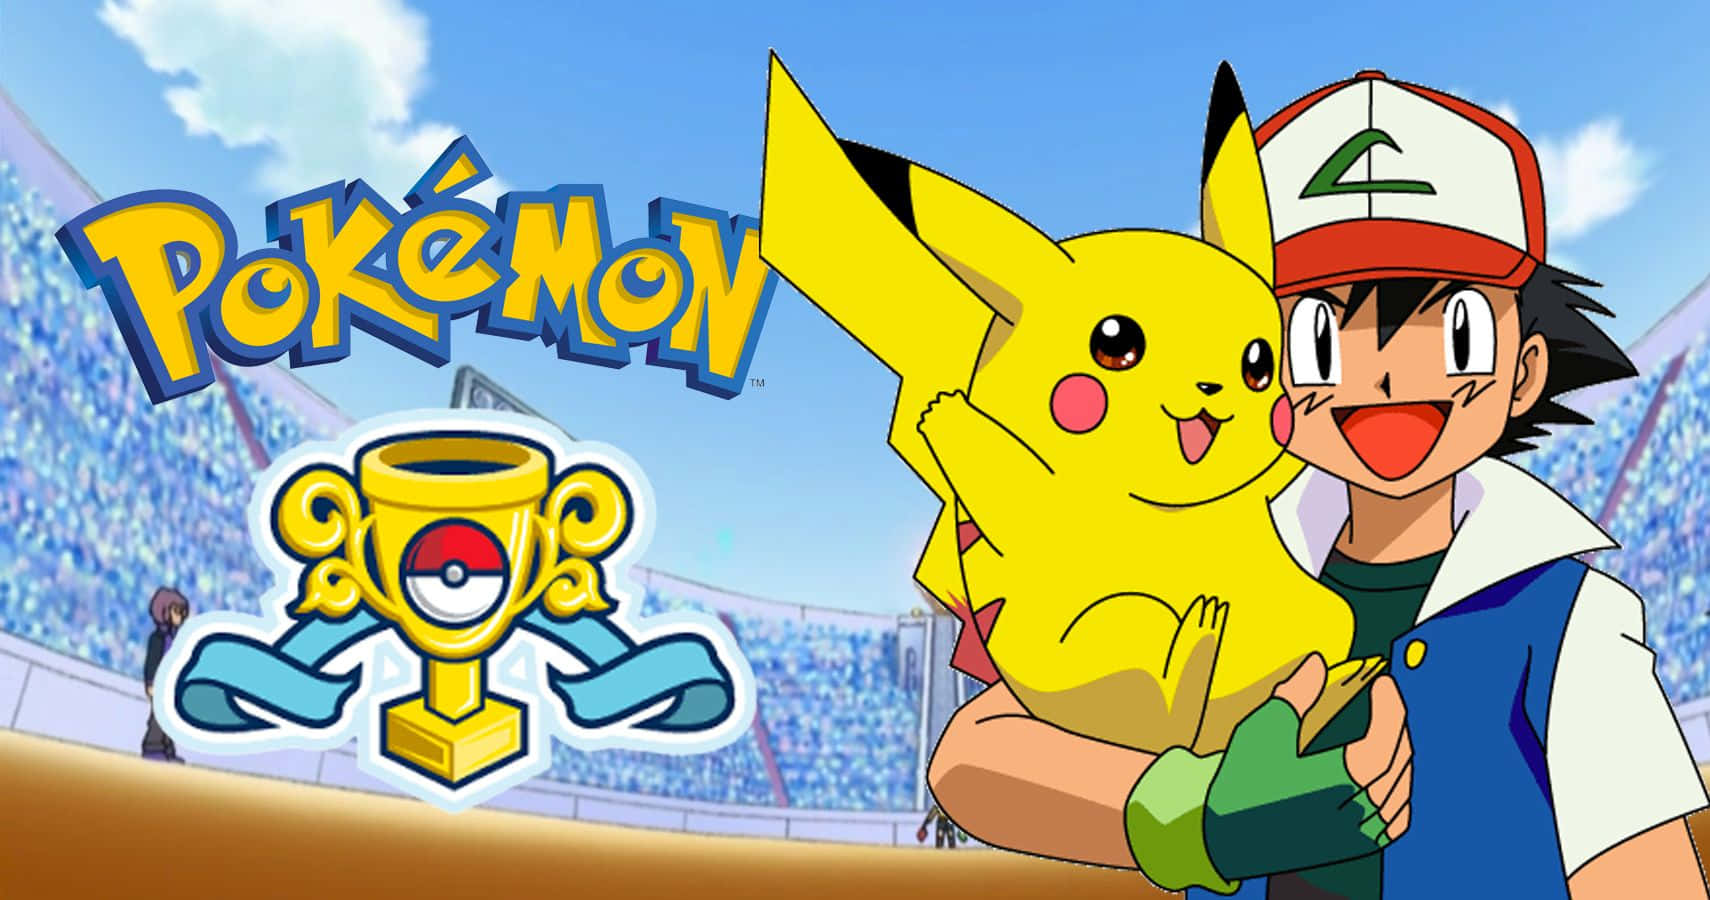 Ash Ketchum and his trusty Pikachu join the Pokemon League Wallpaper